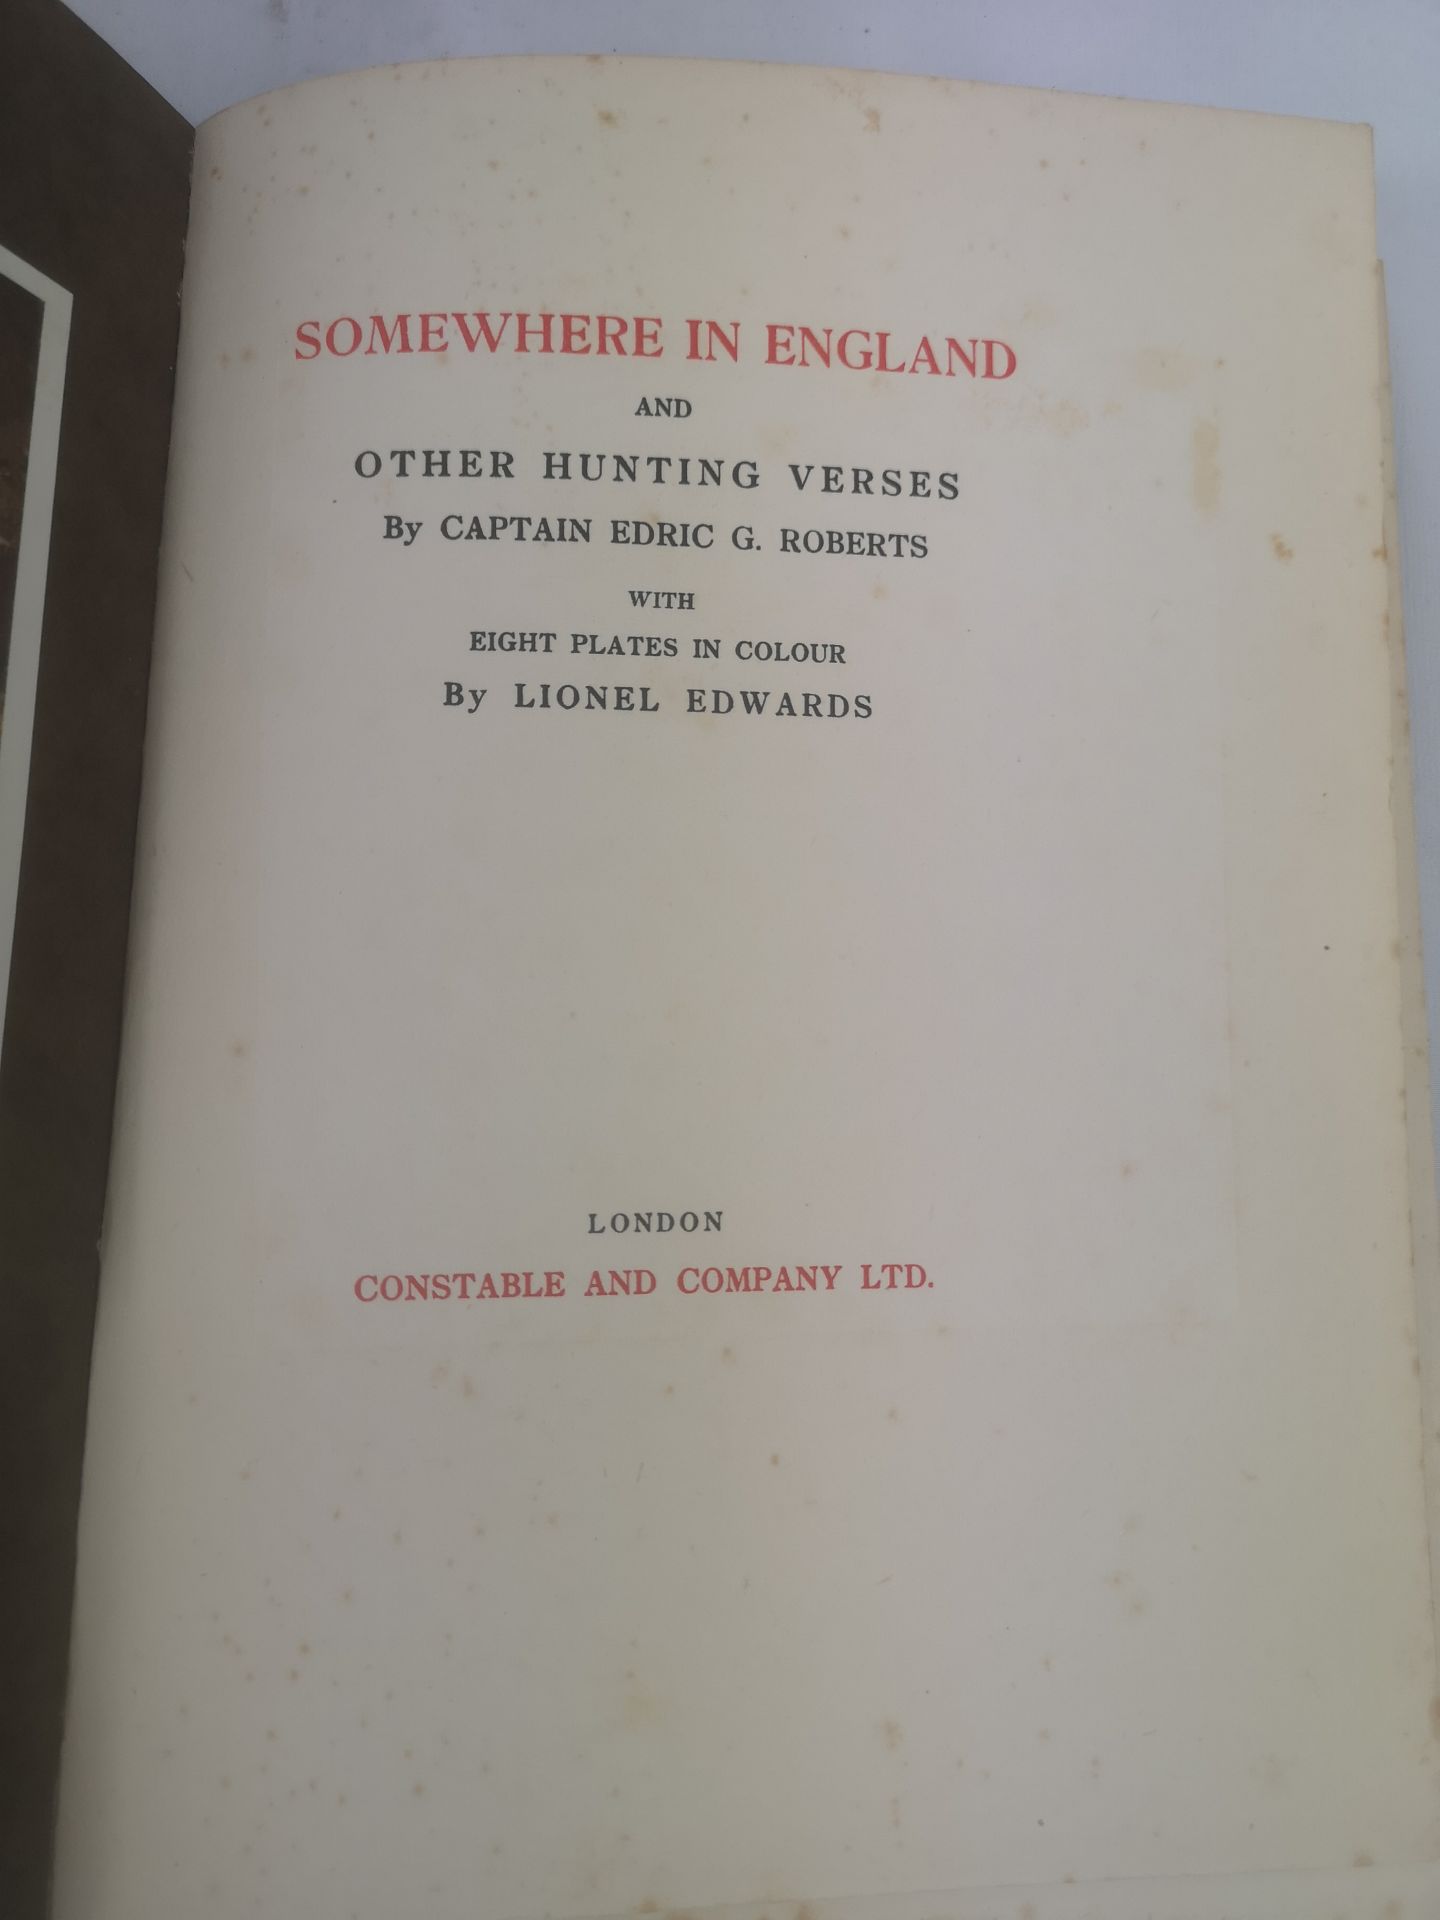 Somewhere in England by Edric G. Roberts and other books - Image 9 of 9